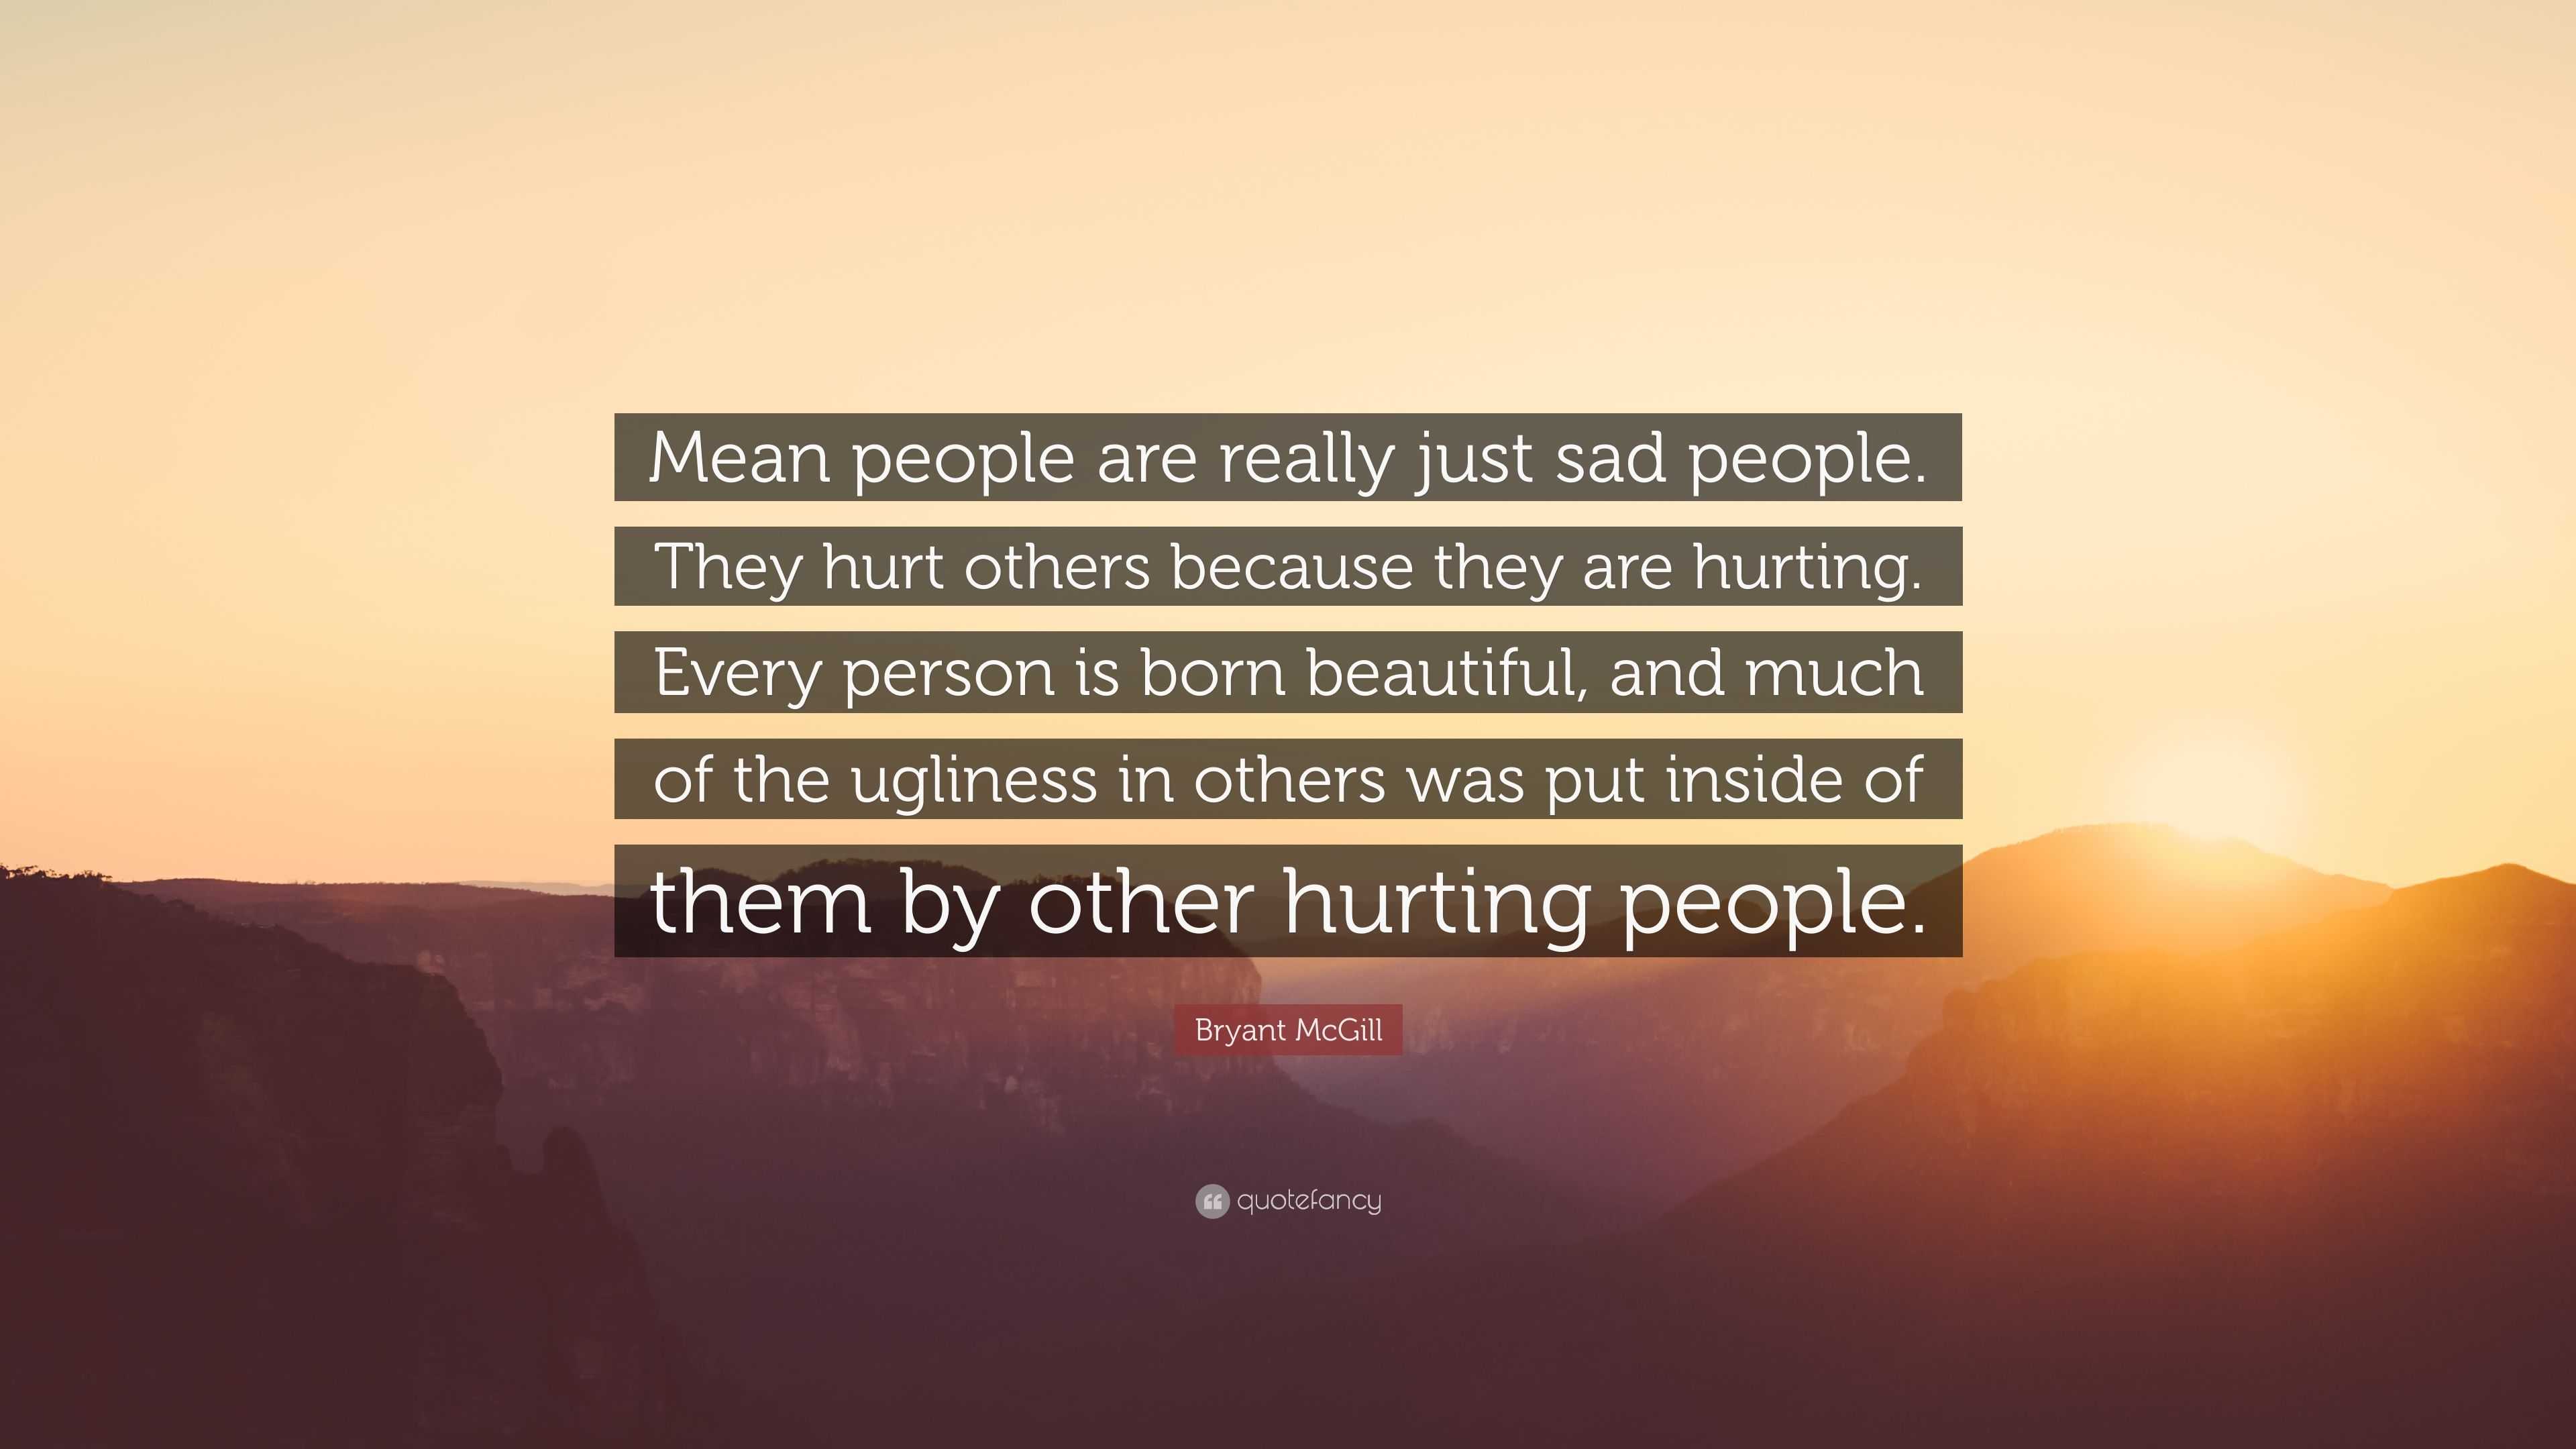 Bryant McGill Quote: “Mean people are really just sad people. They hurt ...